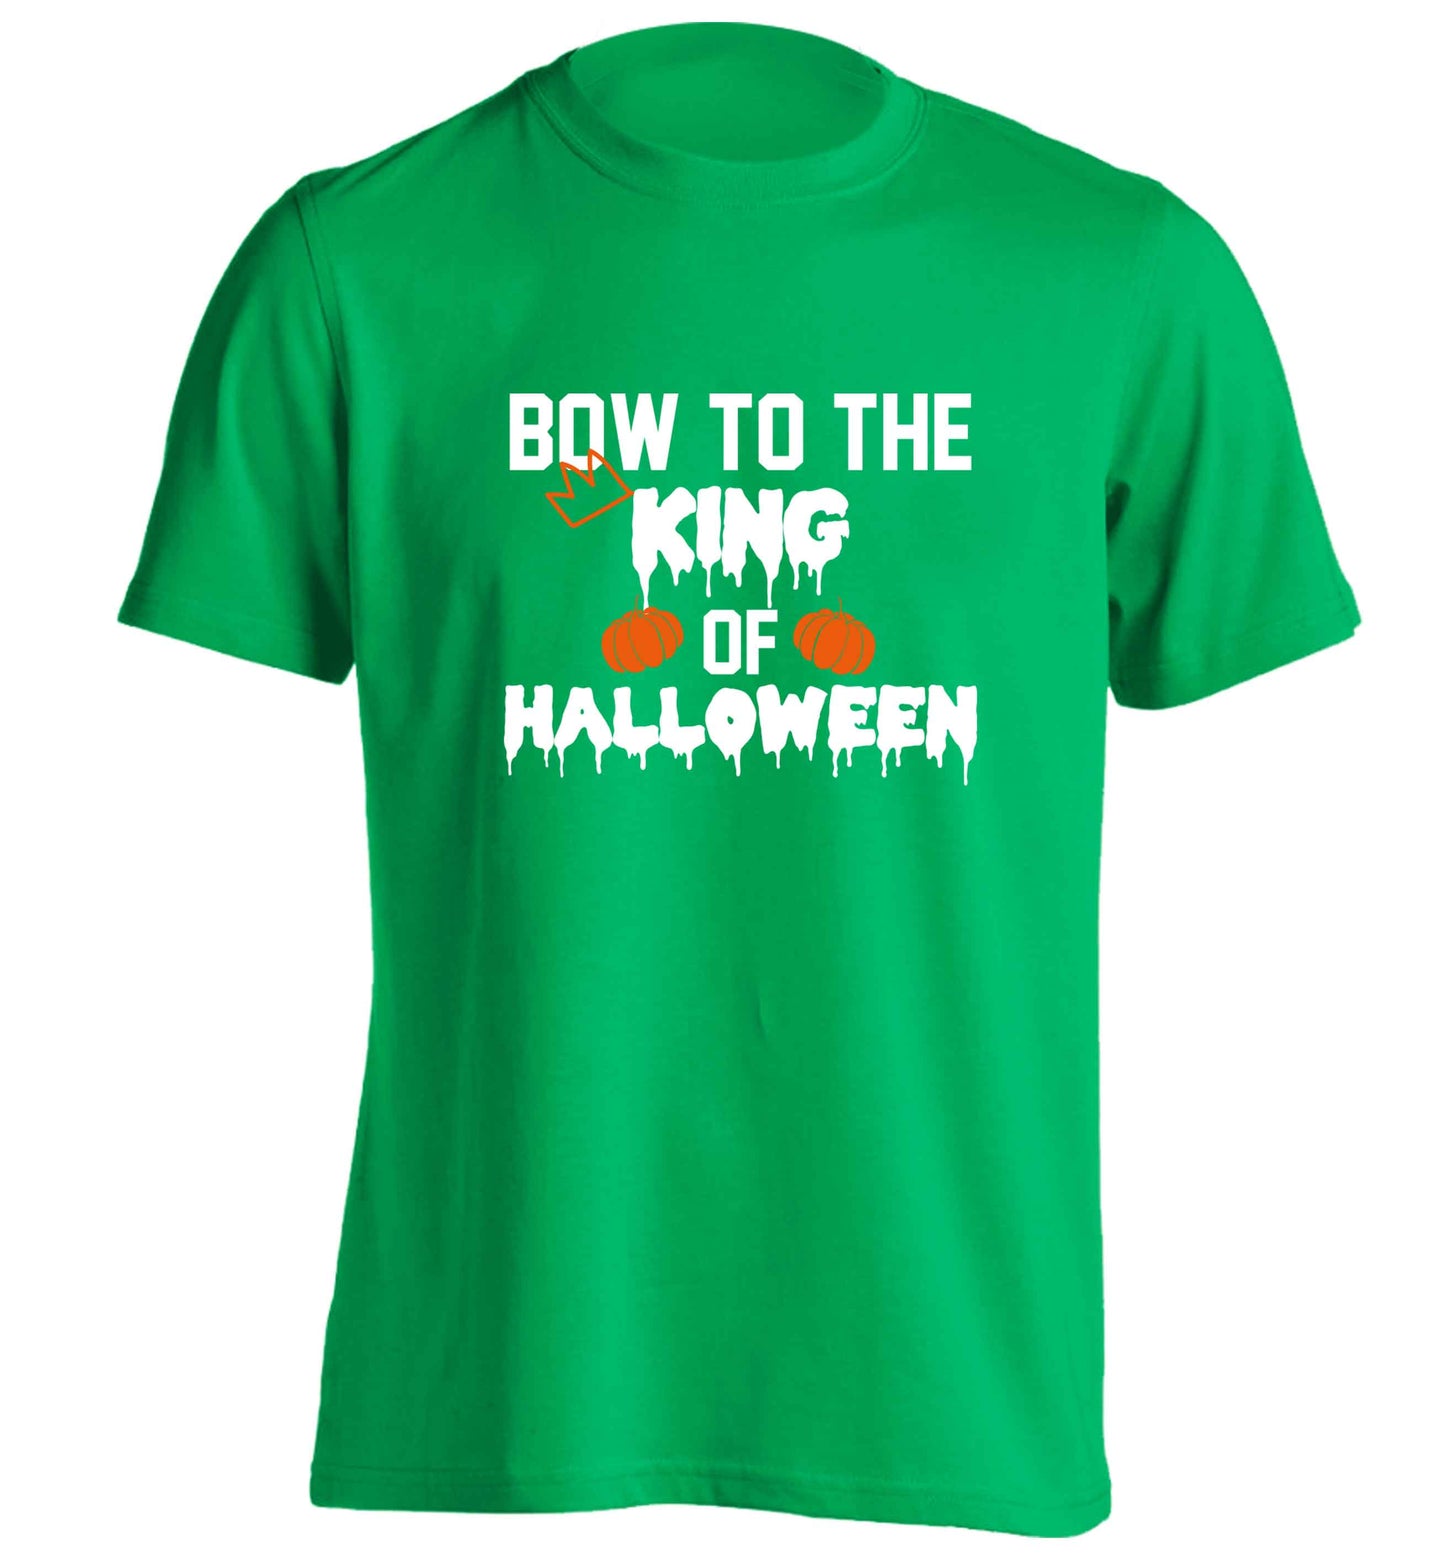 Bow to the King of halloween adults unisex green Tshirt 2XL